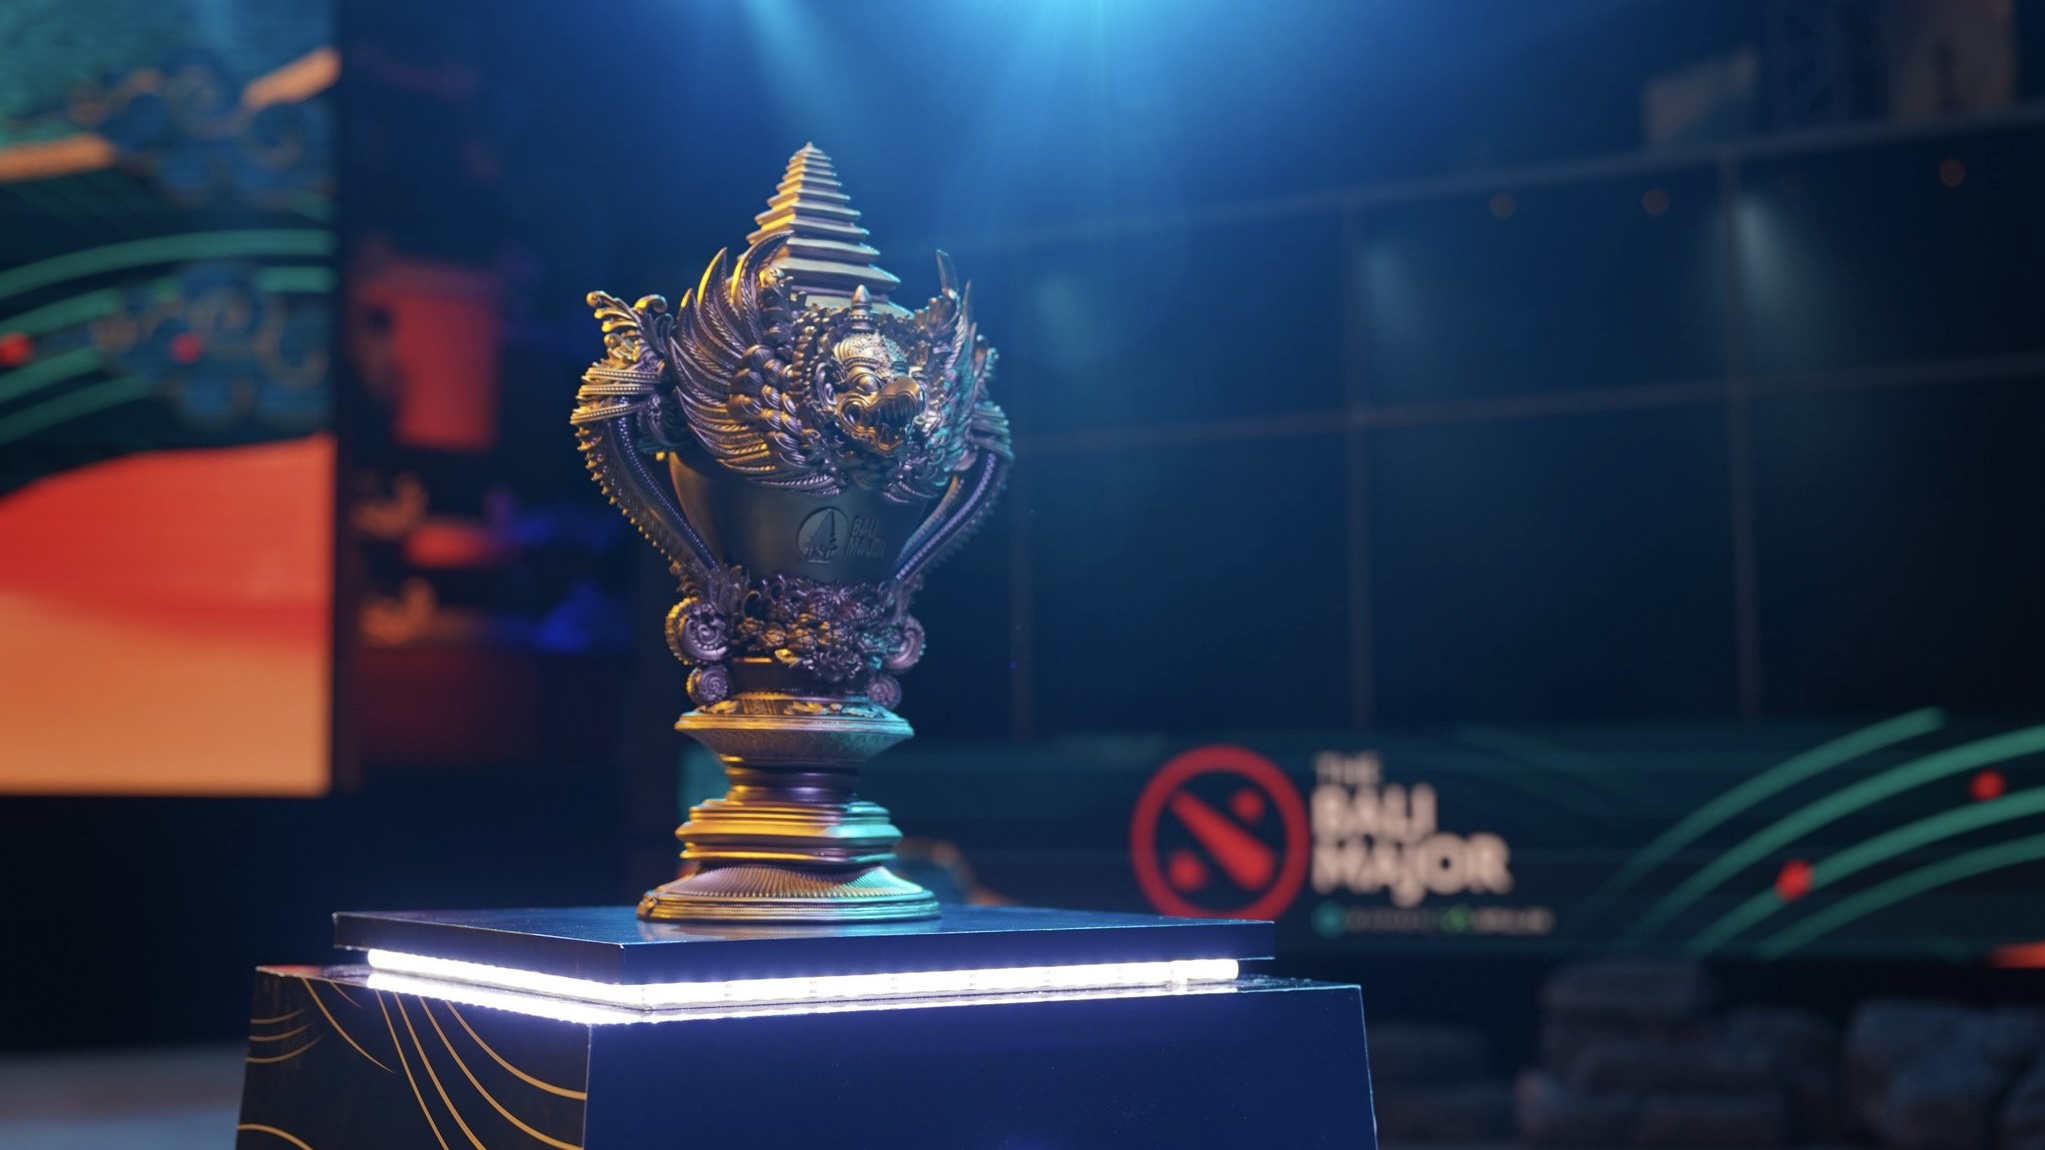 Lima major playoffs day 2. Its official this is the worst dota event. : r/ DotA2